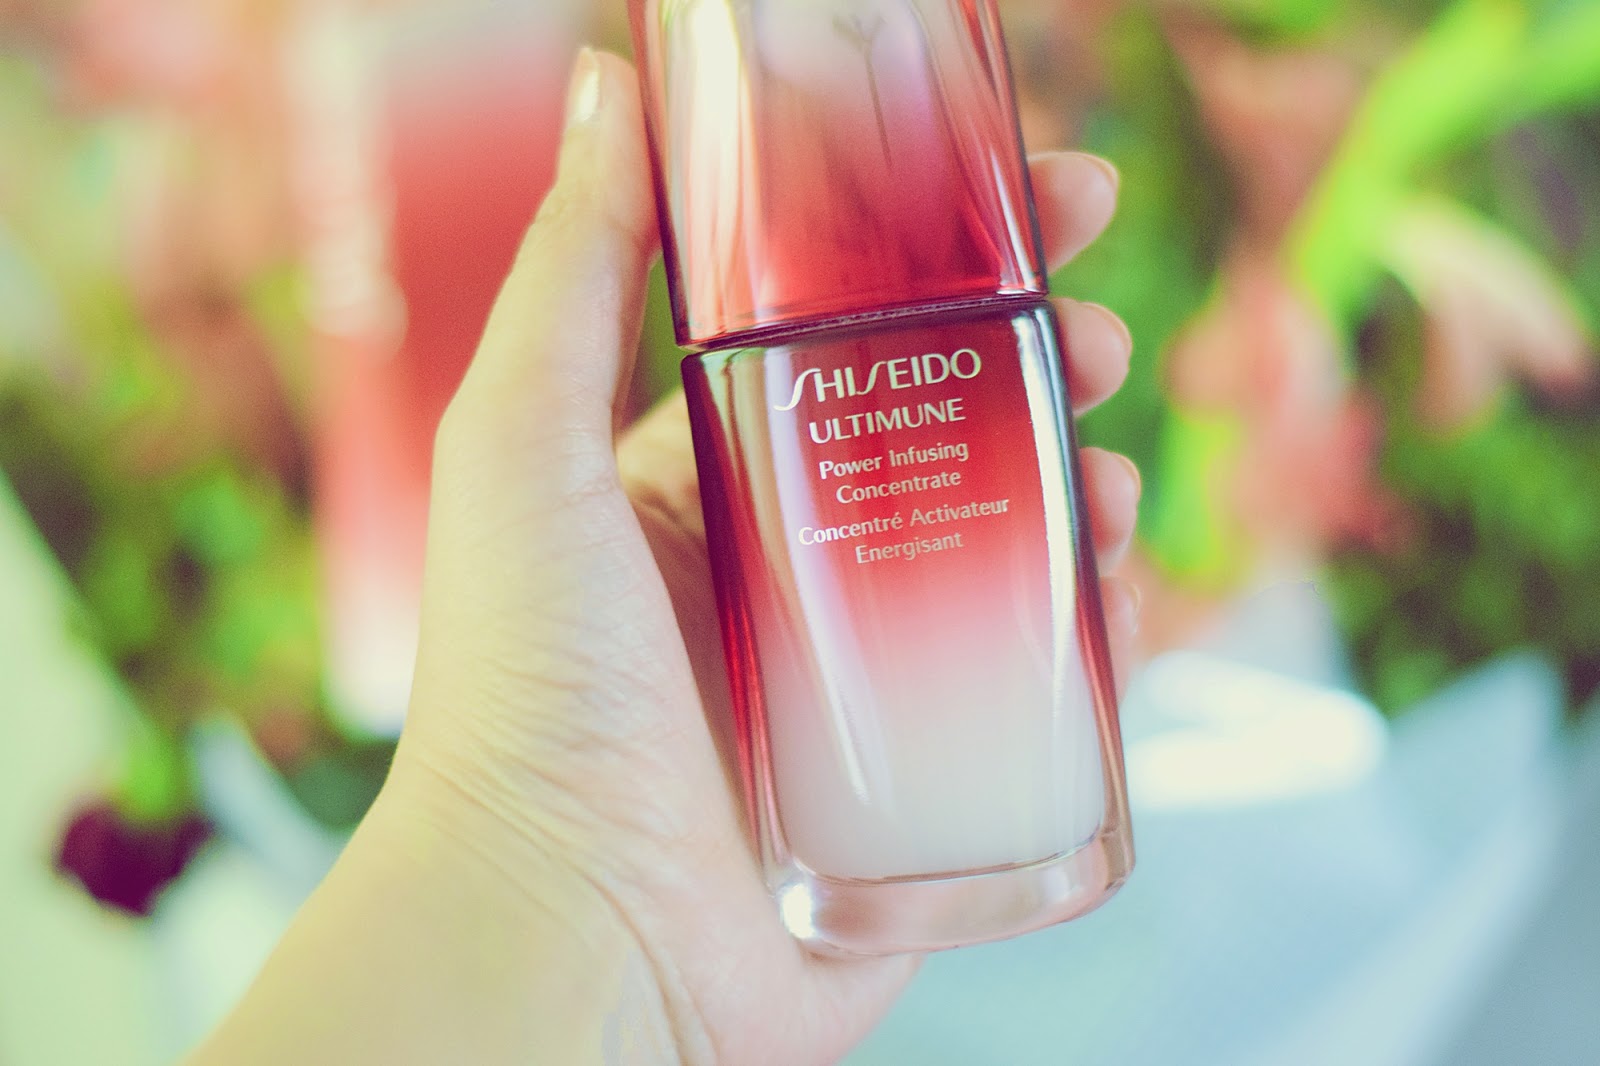 Sheshido ULTIMUNE Power Infusing Concentrate 